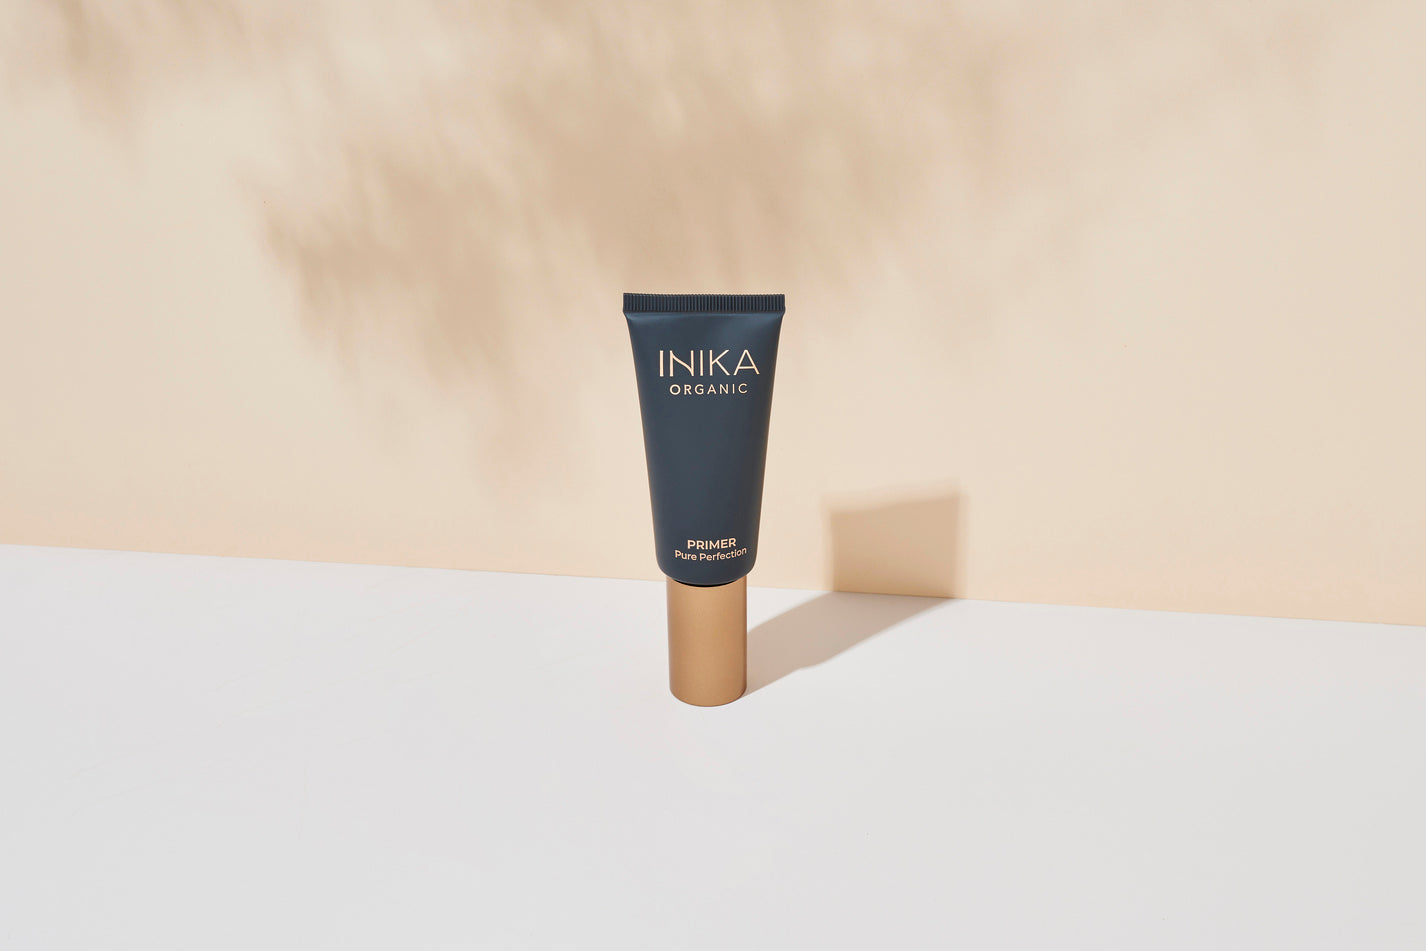 INIKA Organic, Pure Perfection Primer, naturally derived, cruelty free, certified vegan, Australian owned, Natural, Nourished, non-toxic, Nourished Nederland